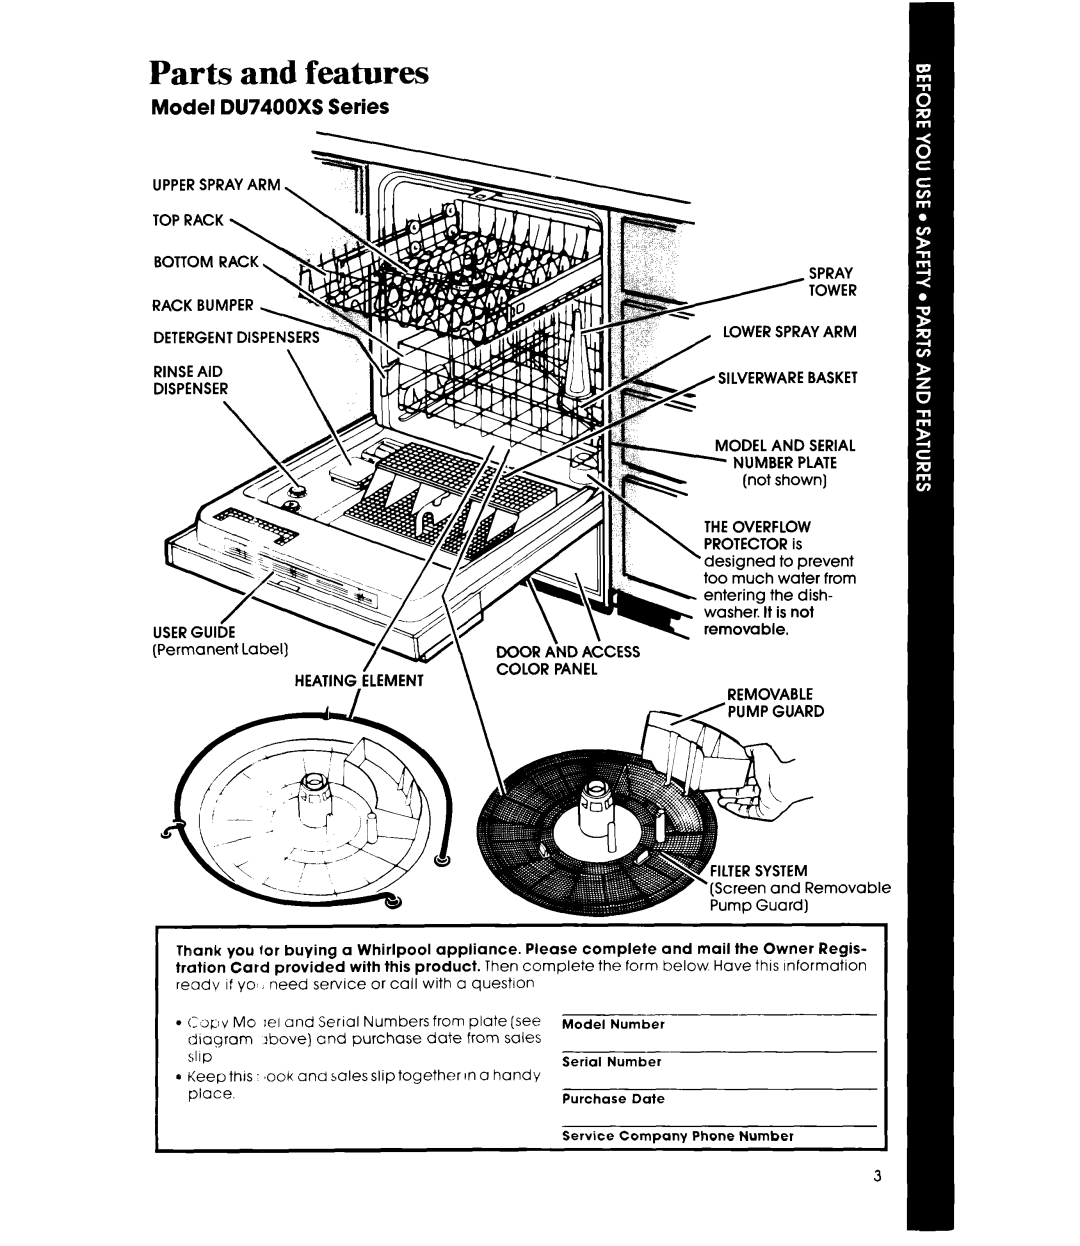 Whirlpool manual Parts and features, Model DU7400XS Series 